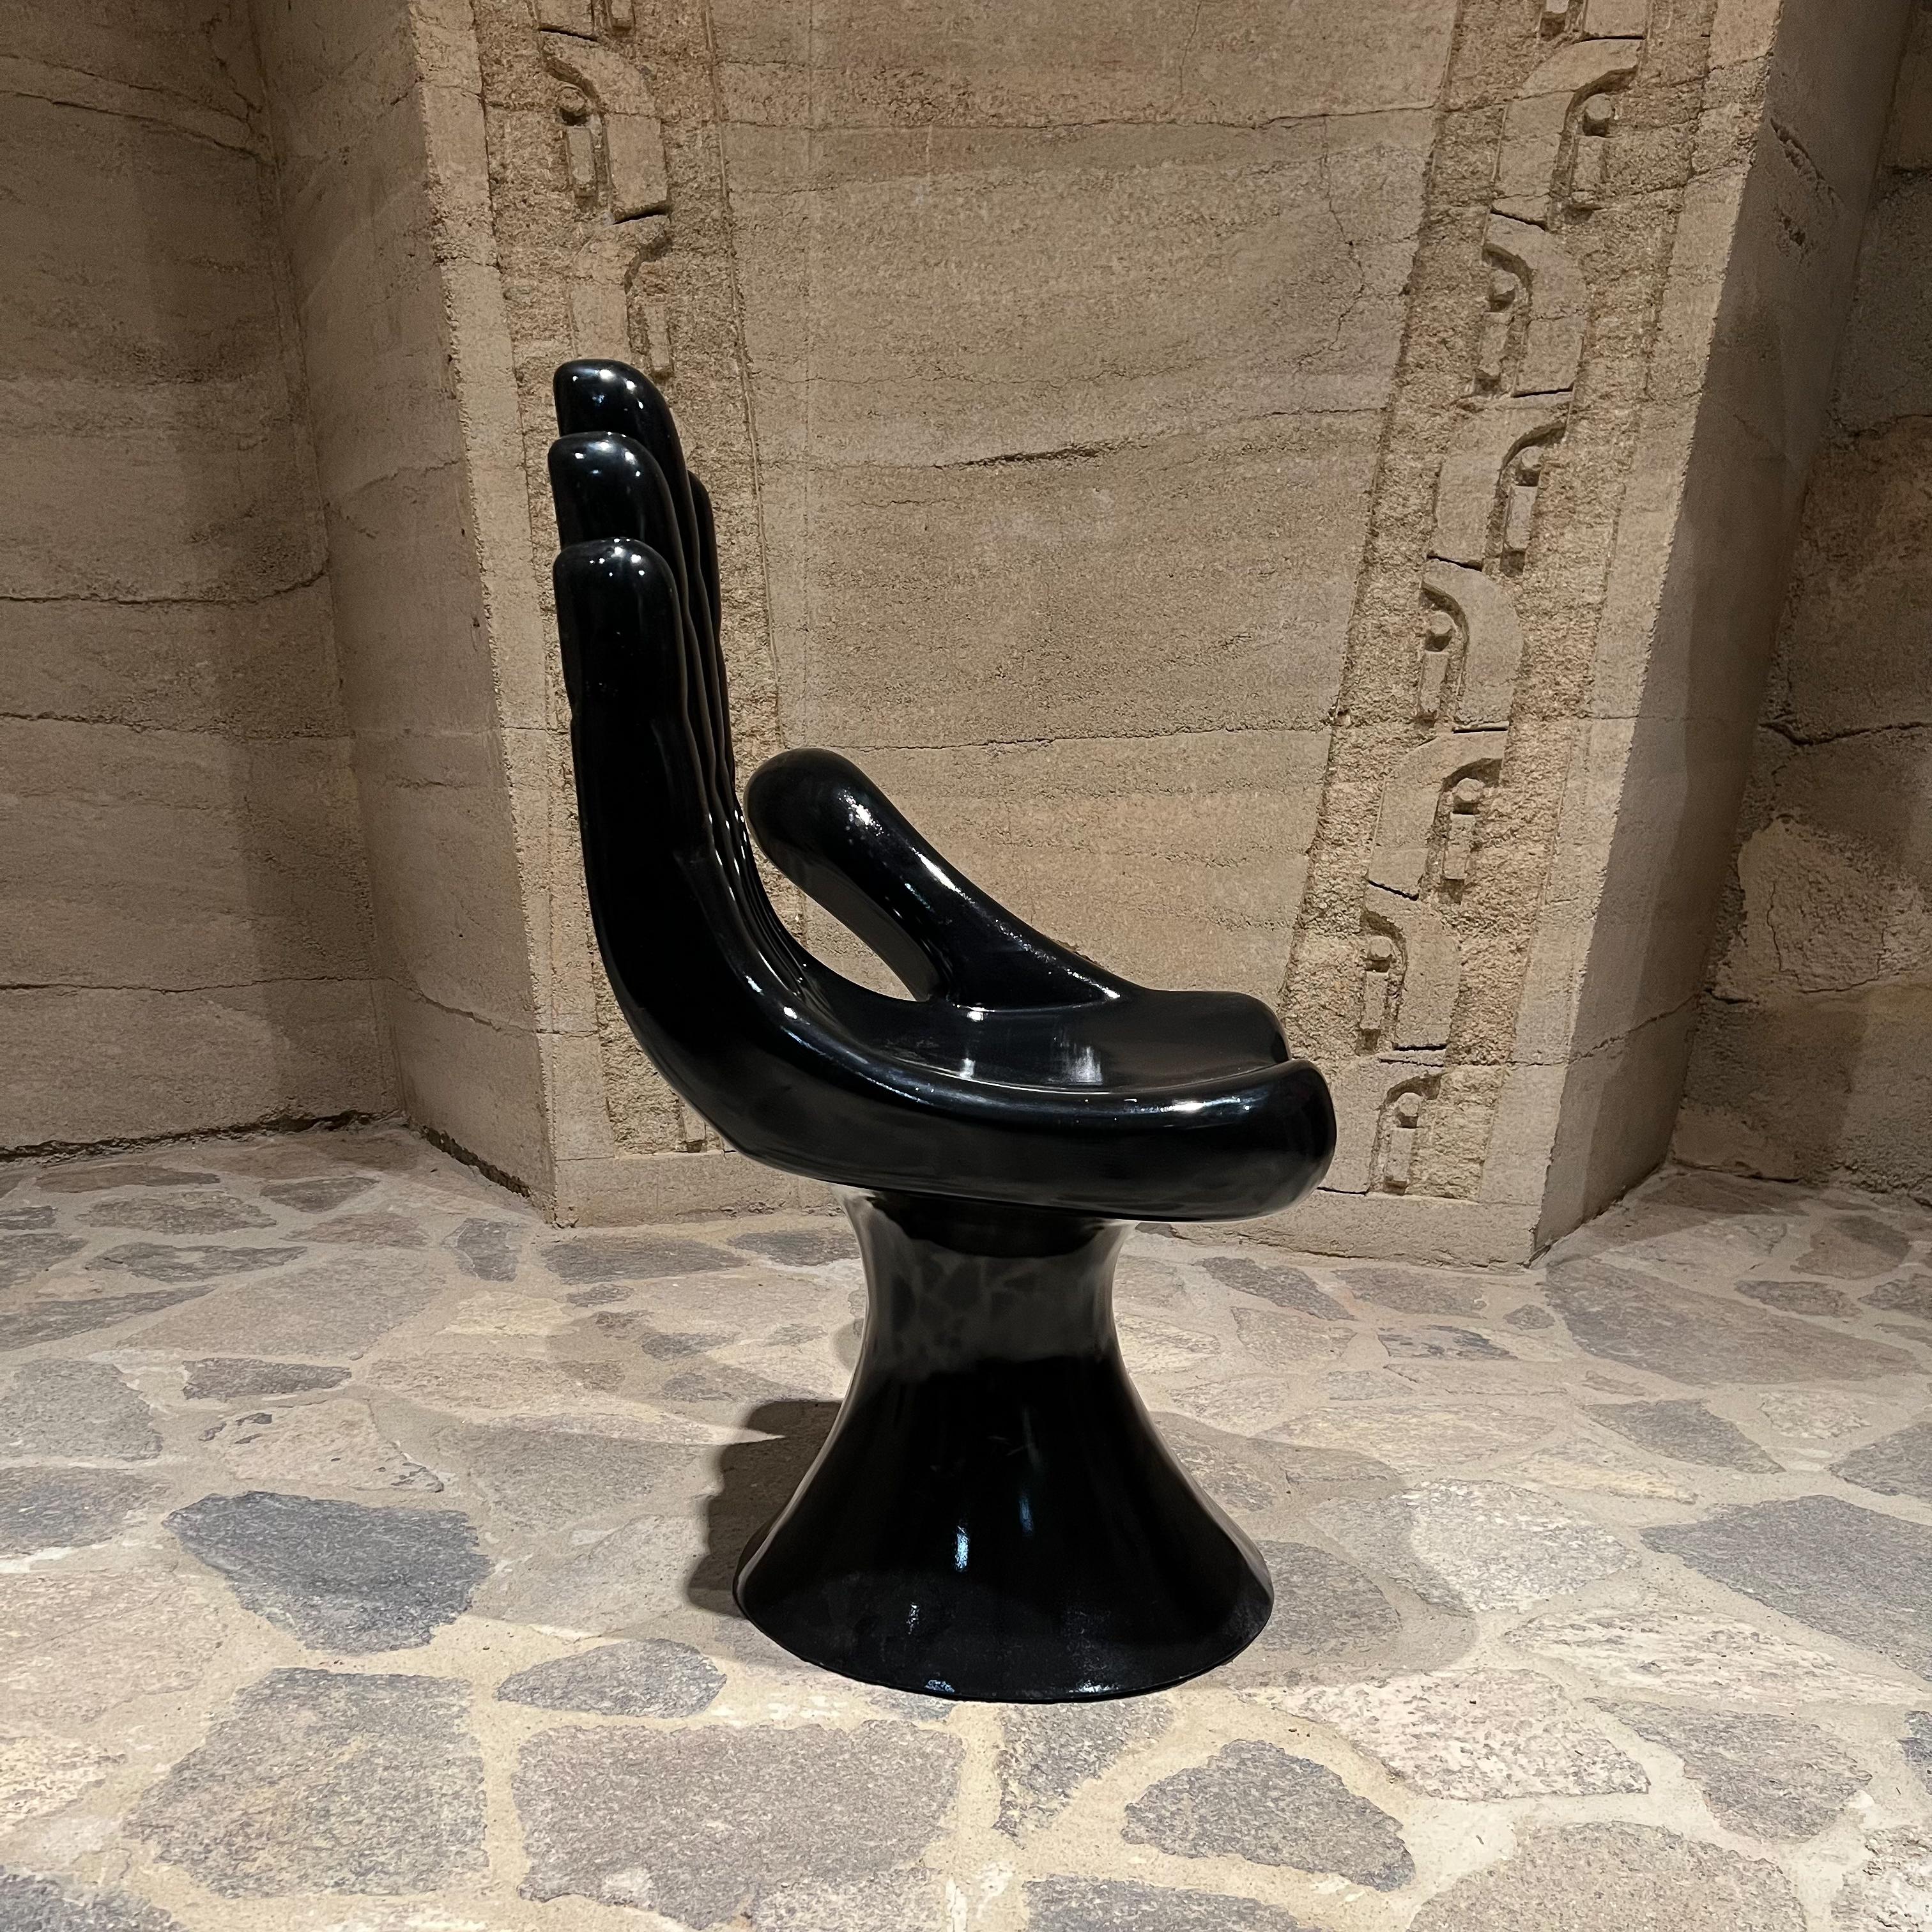 Fiberglass Hand chair
Phenomenal Black Fiberglass Hand Chair by Pedro Friedeberg Mexico
Unmarked
36 tall x 24 w 21 d Seat 17h
Preowned original vintage good condition.
Refer to images provided.
LA delivery.



